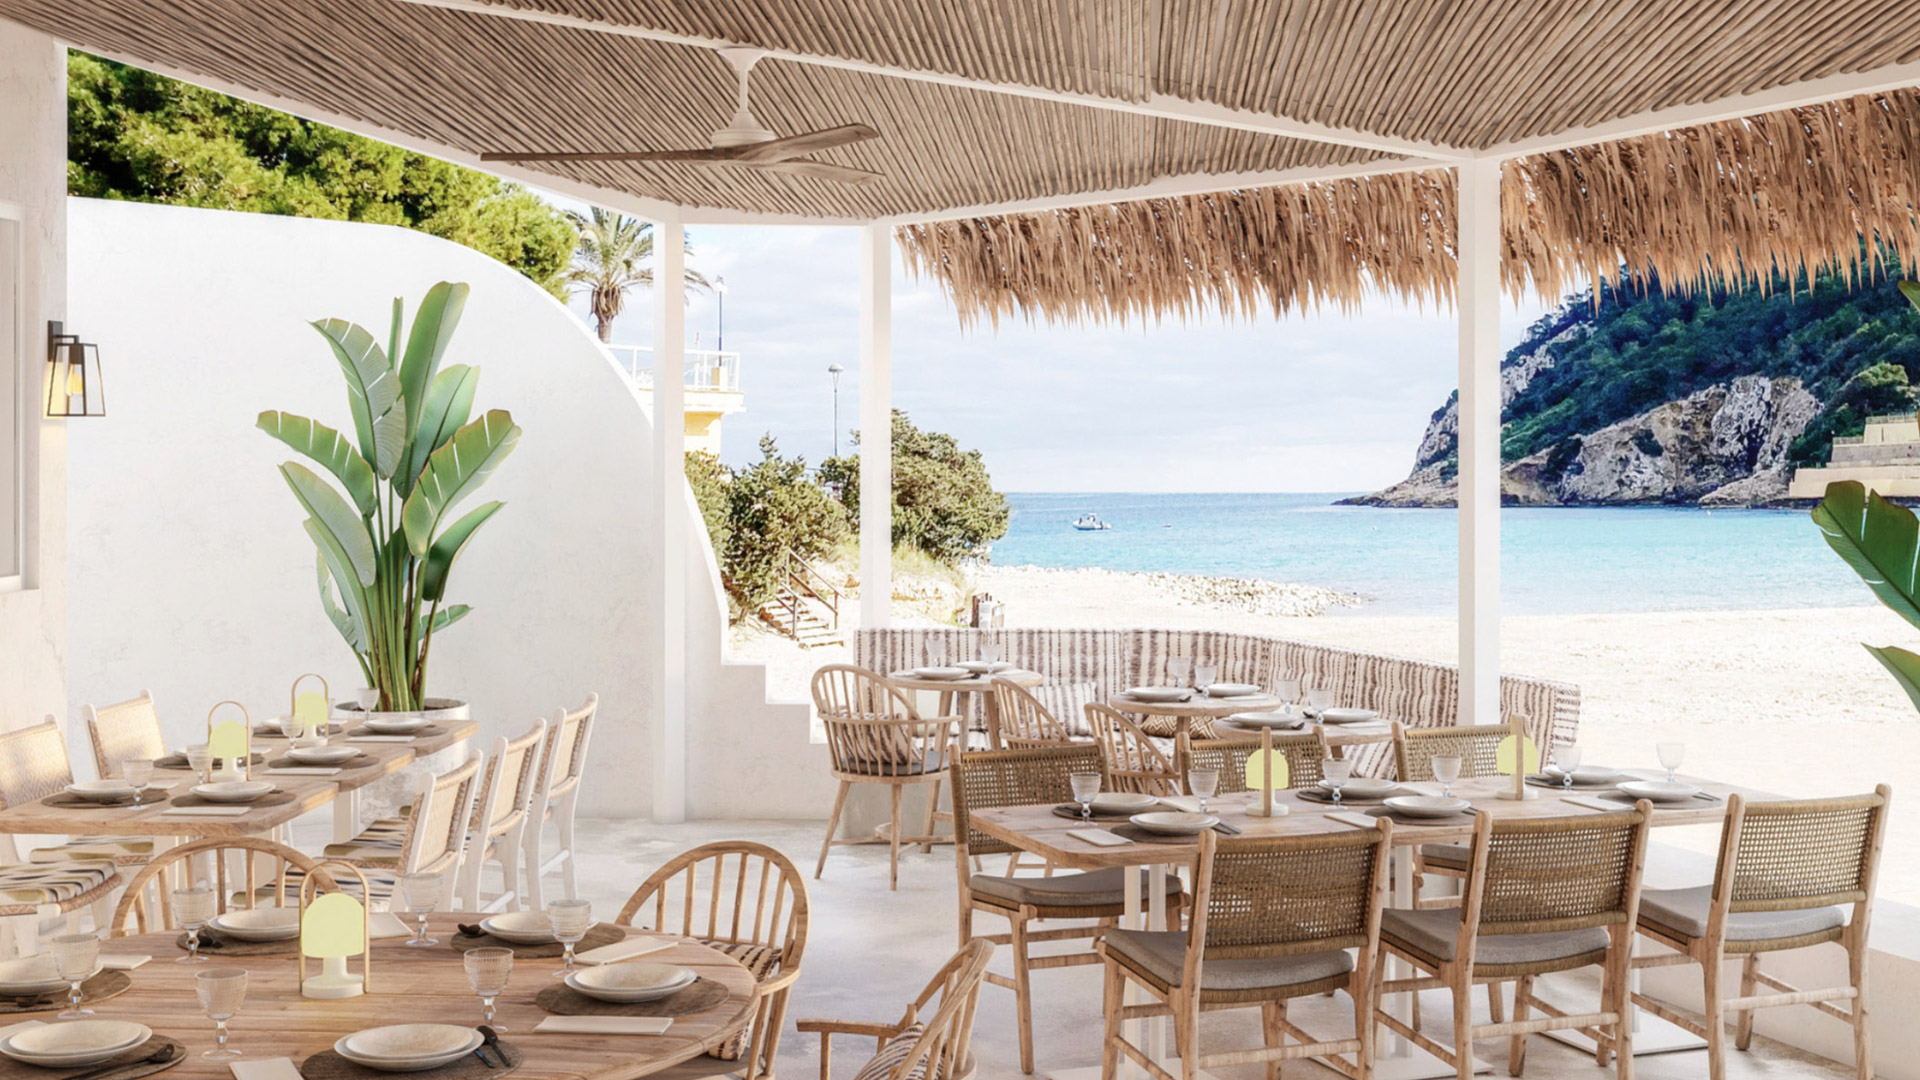 Outdoor restaurant with wicker chairs, light brown tables, white walls, green plants, and straw patio cover overlooking the beach and blue sea